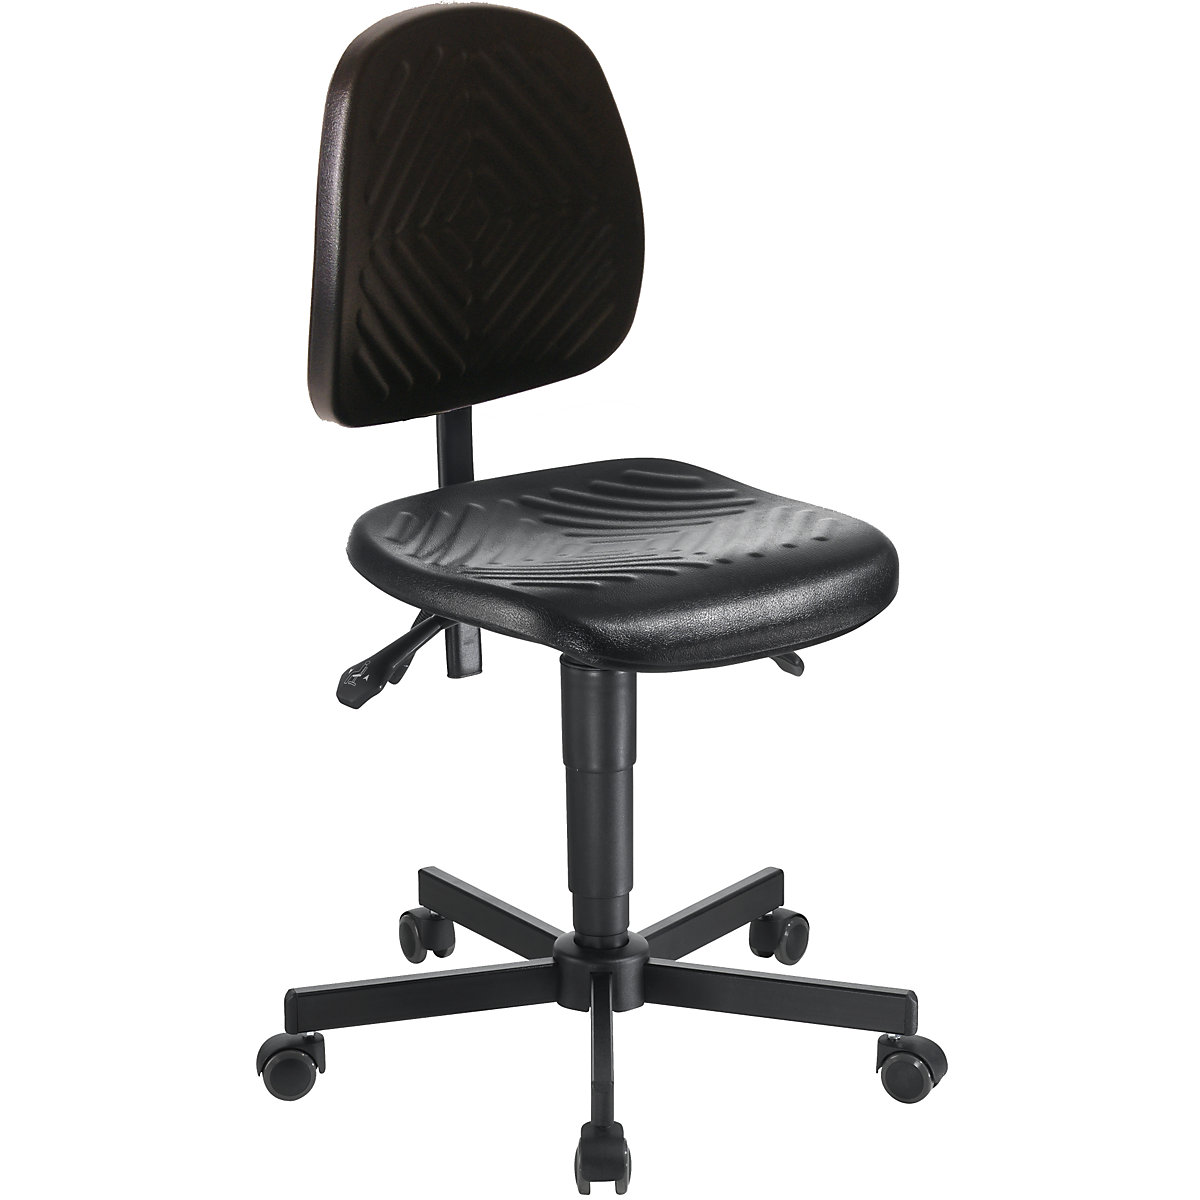 Industrial swivel chair, polyurethane upholstery, gas lift height adjustment – meychair